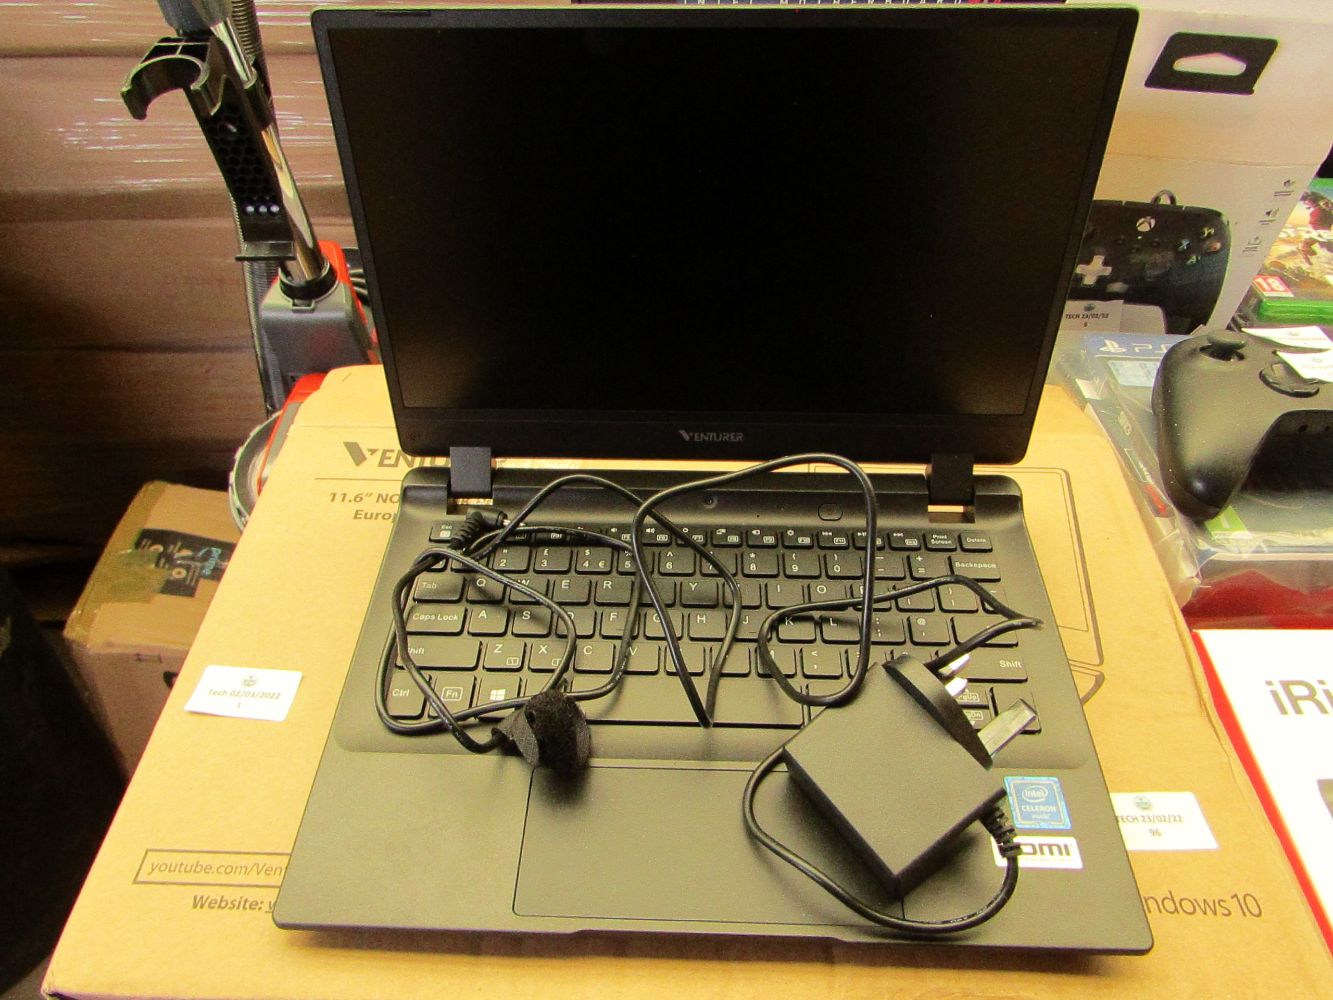 Tech Auction Containing; Laptops, Gaming headsets, Phones, Motherboards, CCTV, And Much More!